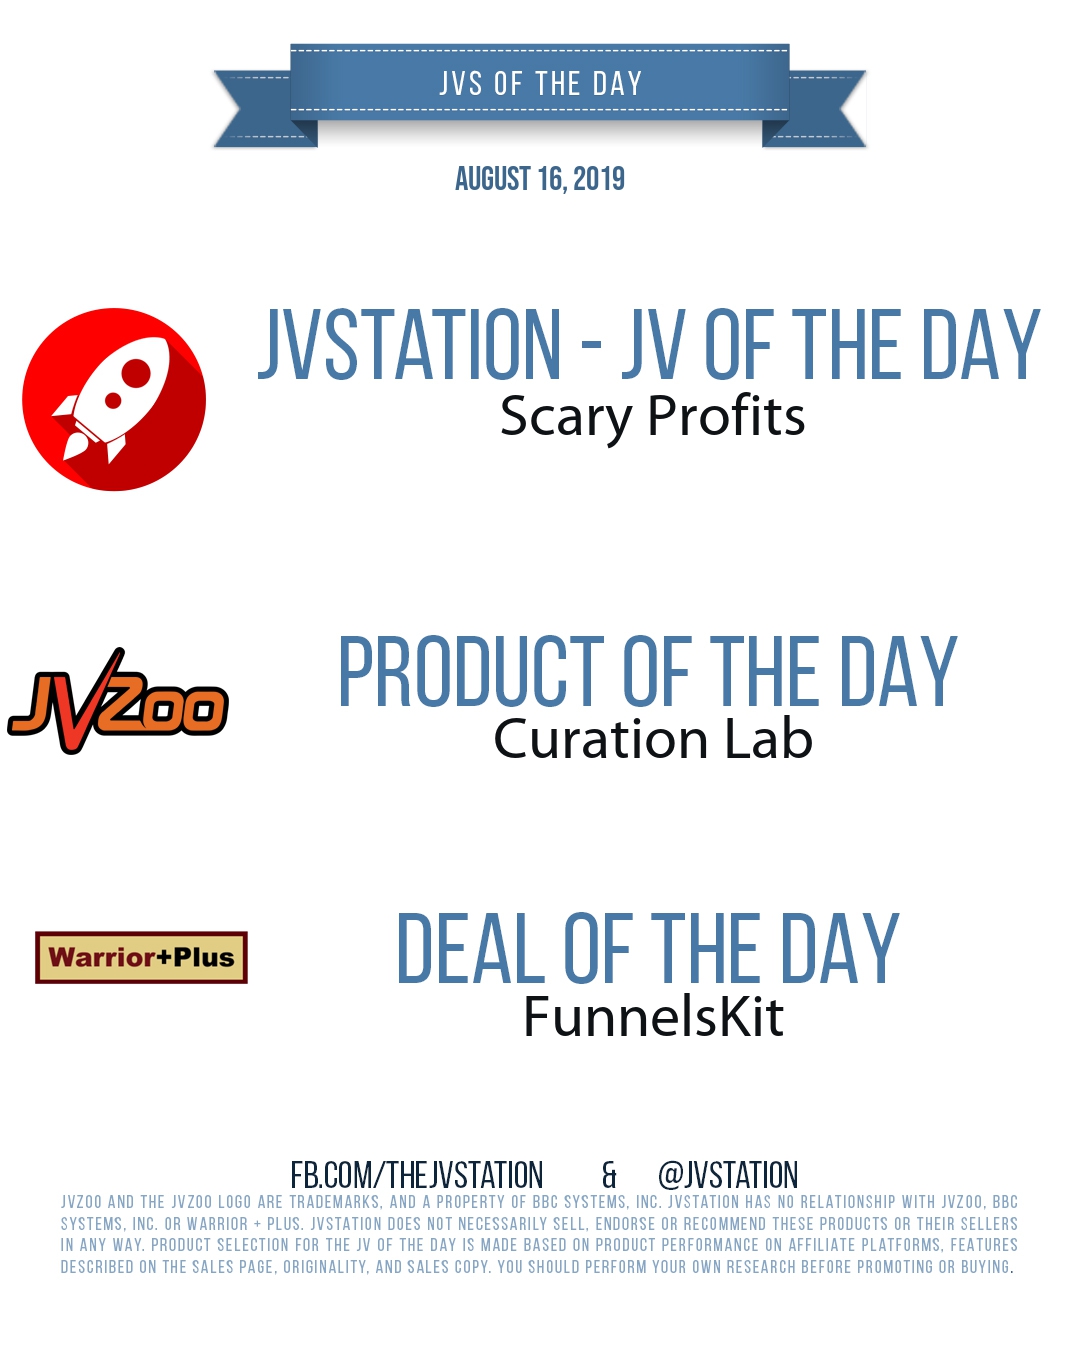 JVs of the day - August 16, 2019